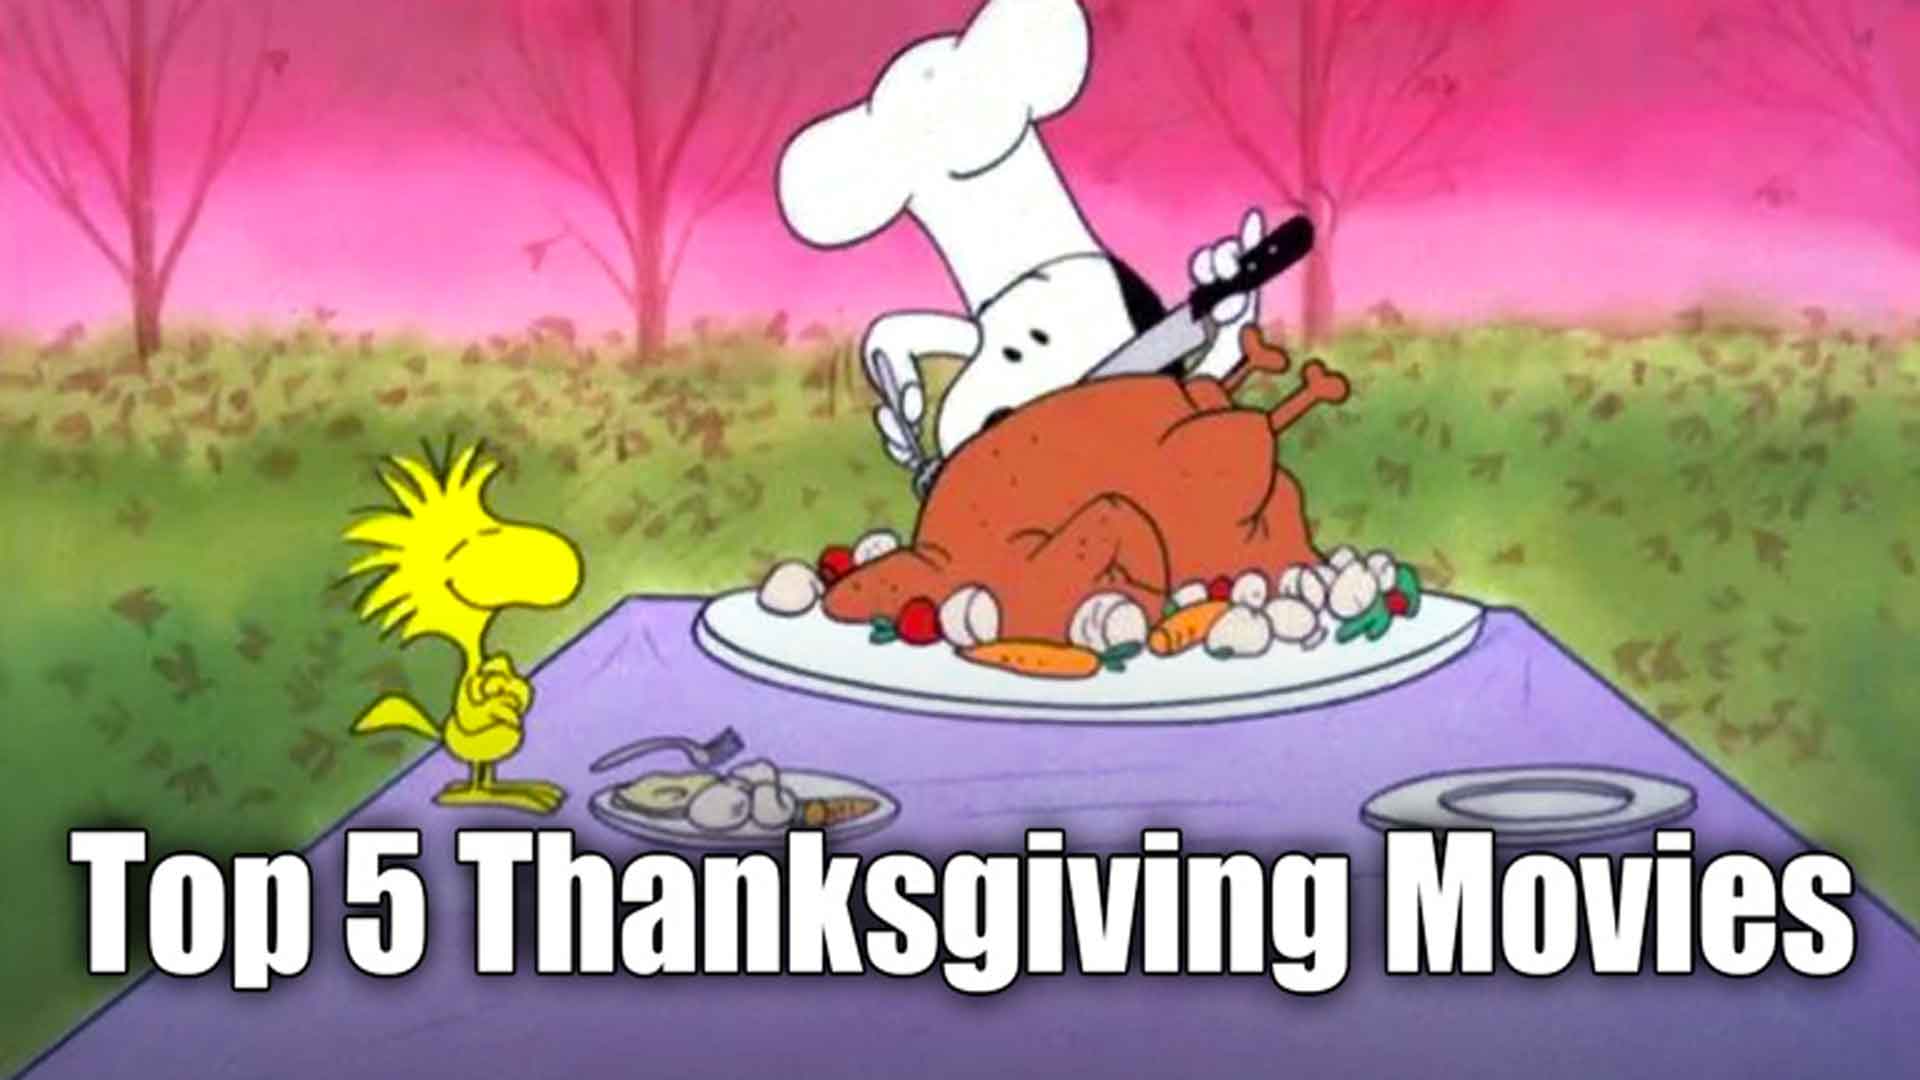 The 5 Best Thanksgiving Movies To Watch With The Whole Family